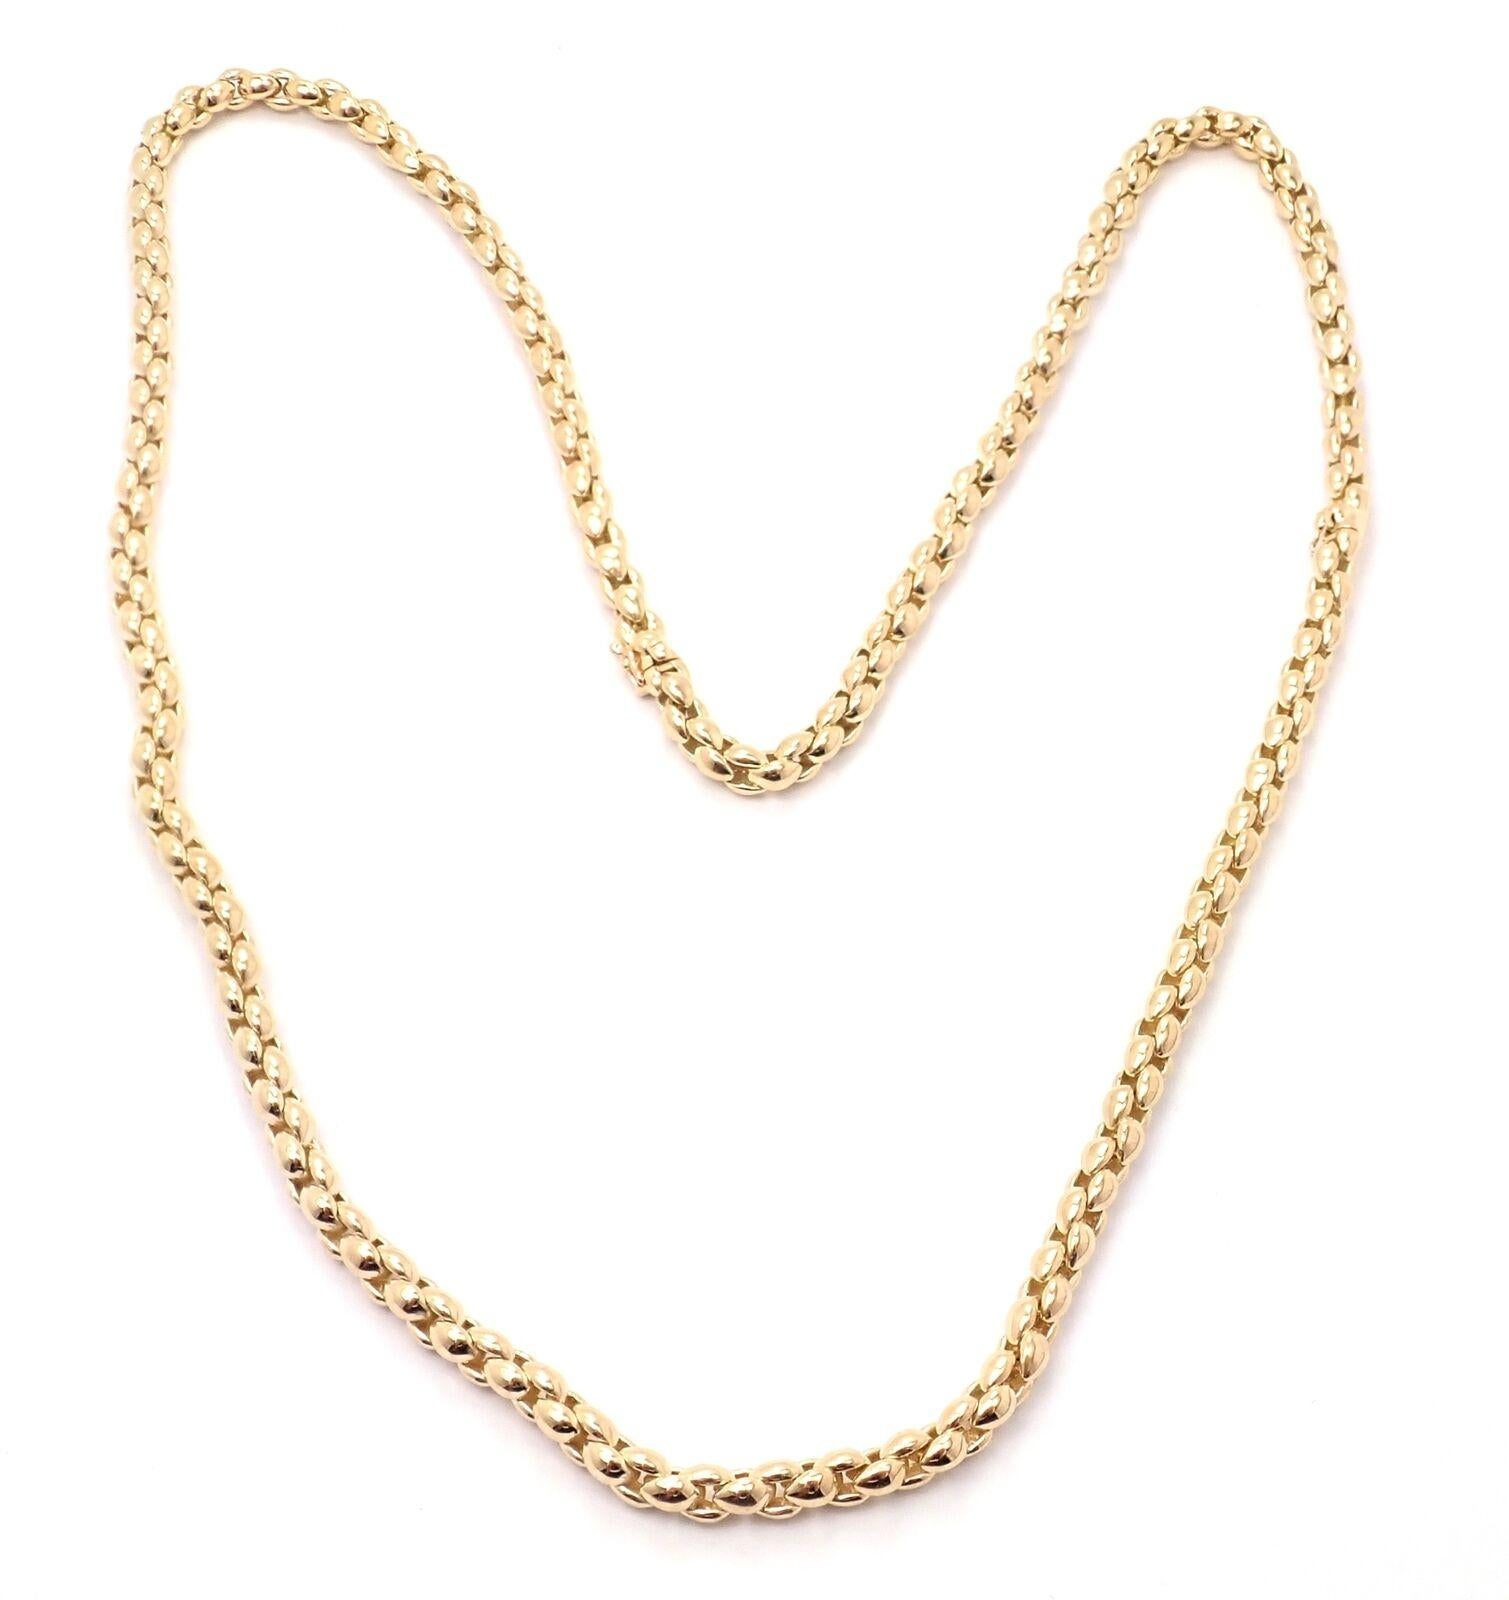 18k Yellow Gold Vintage Link Chain Necklace And Bracelet Set by Cartier.
Details:
Length: Necklace - Length: 16.5